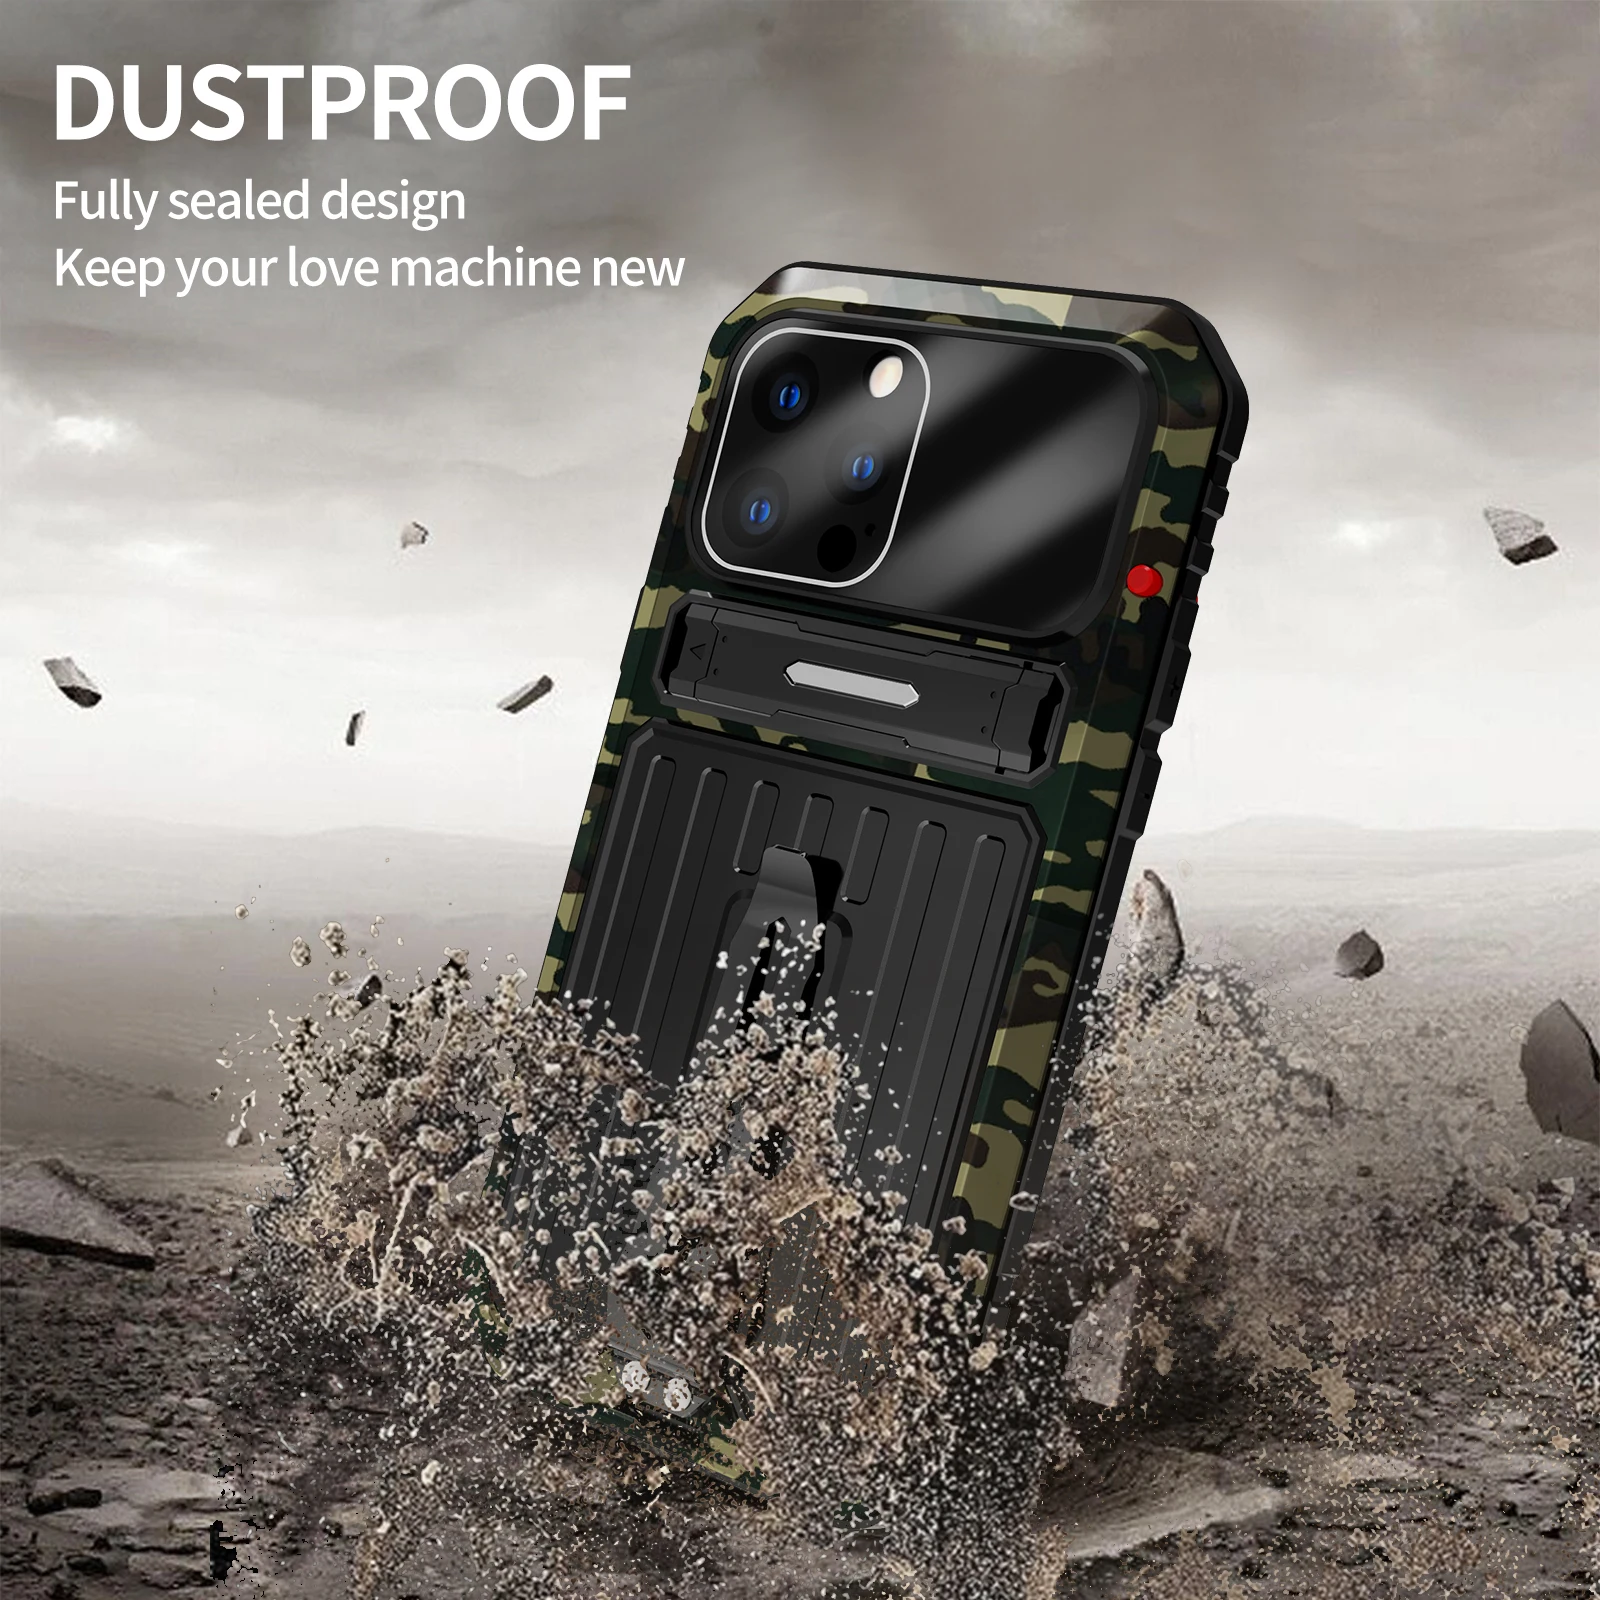 FATBEAR Magsafe Tactical Military Grade Rugged Shockproof Bumper Case Cover  for Apple iPhone 13 Pro Max 12 Pro Max - AliExpress